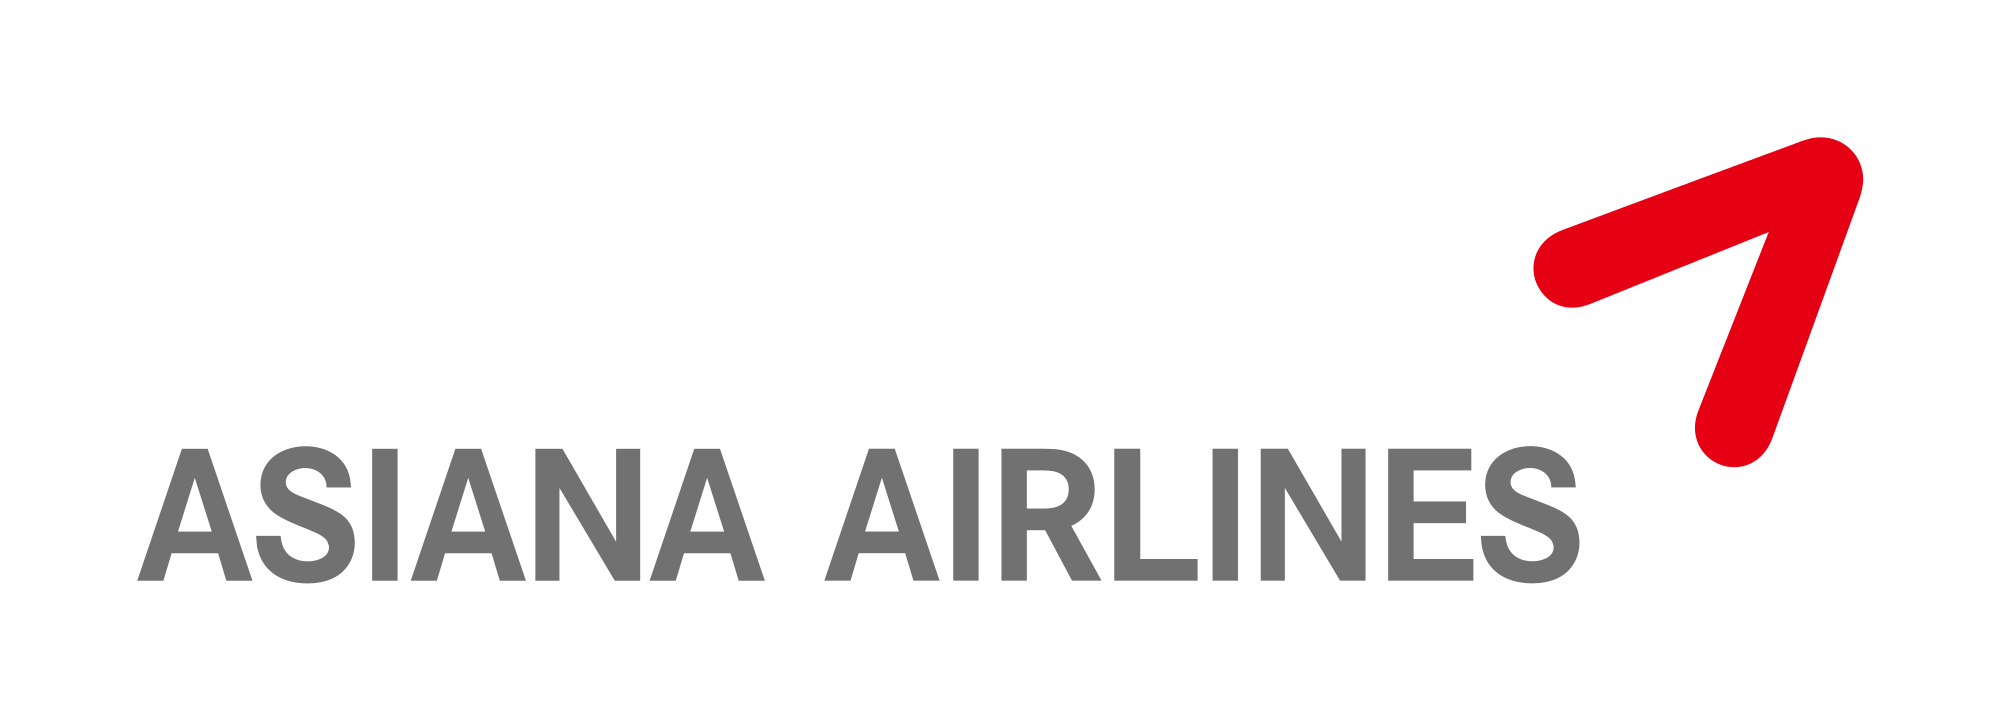 Asia Airlines Logo - Asiana Airlines. Your Travel Corporate